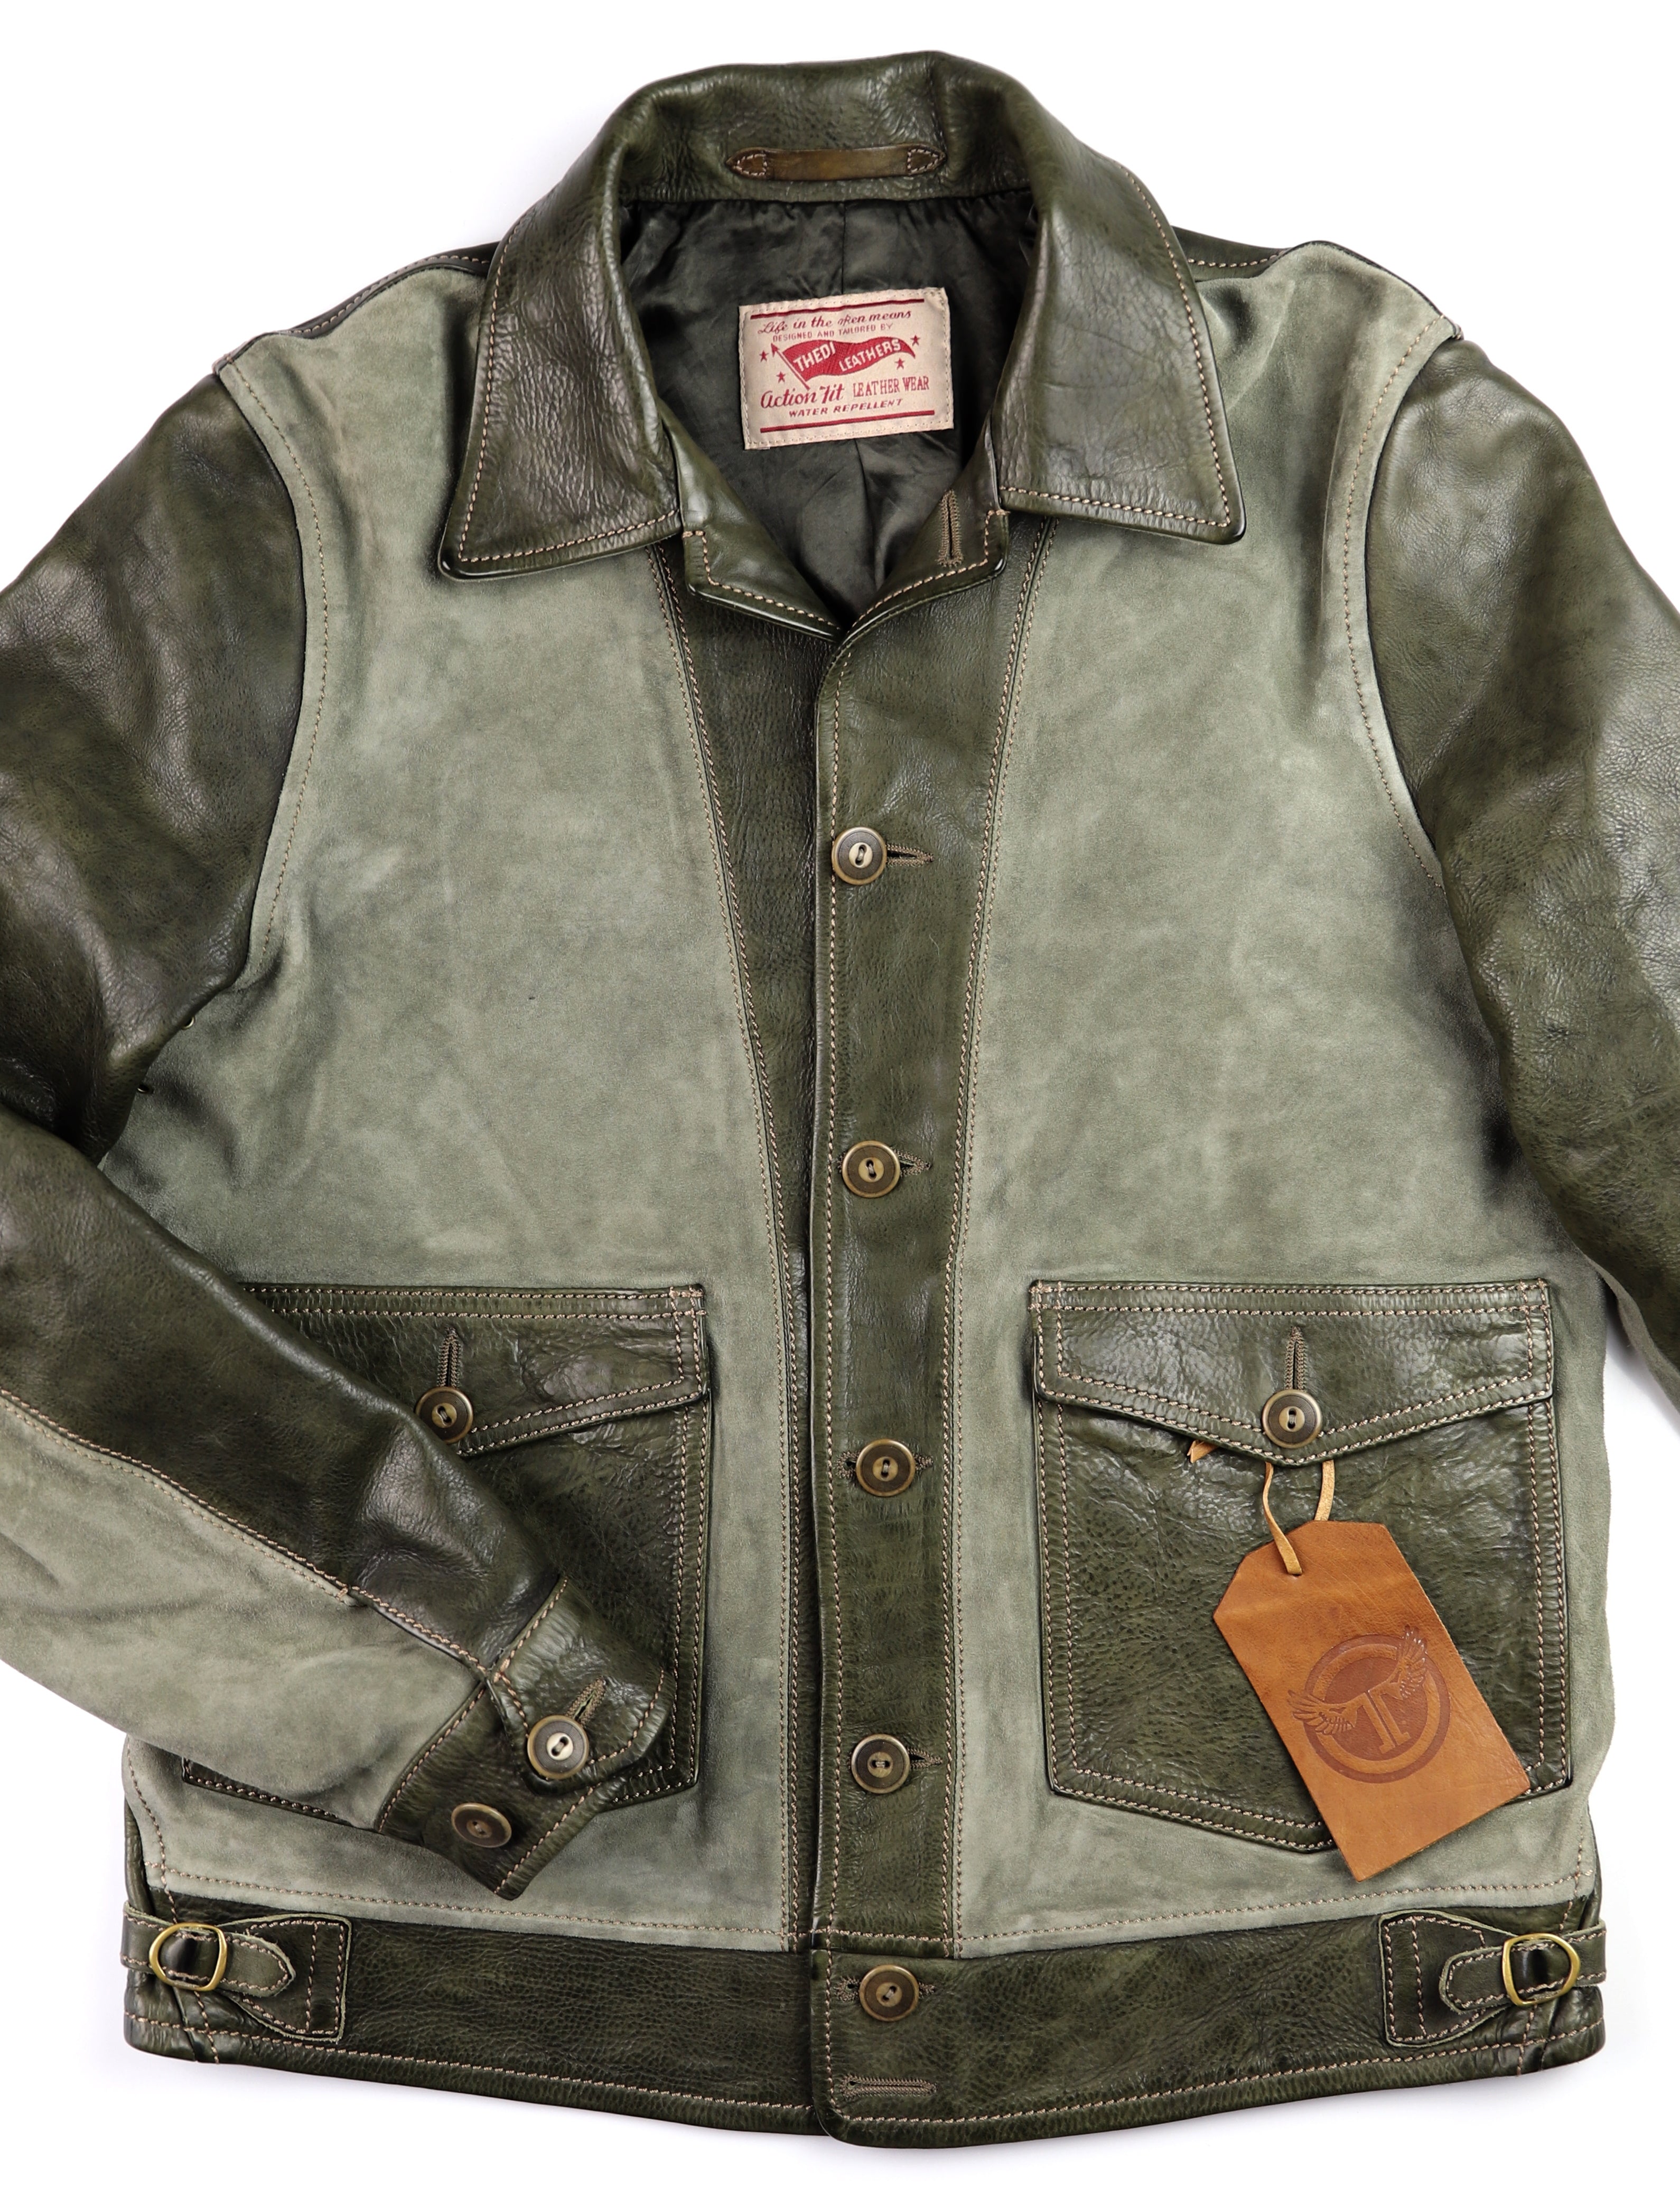 Thedi Niko Button-Up Jacket, size Medium, Green Goat Suede and Cowhide